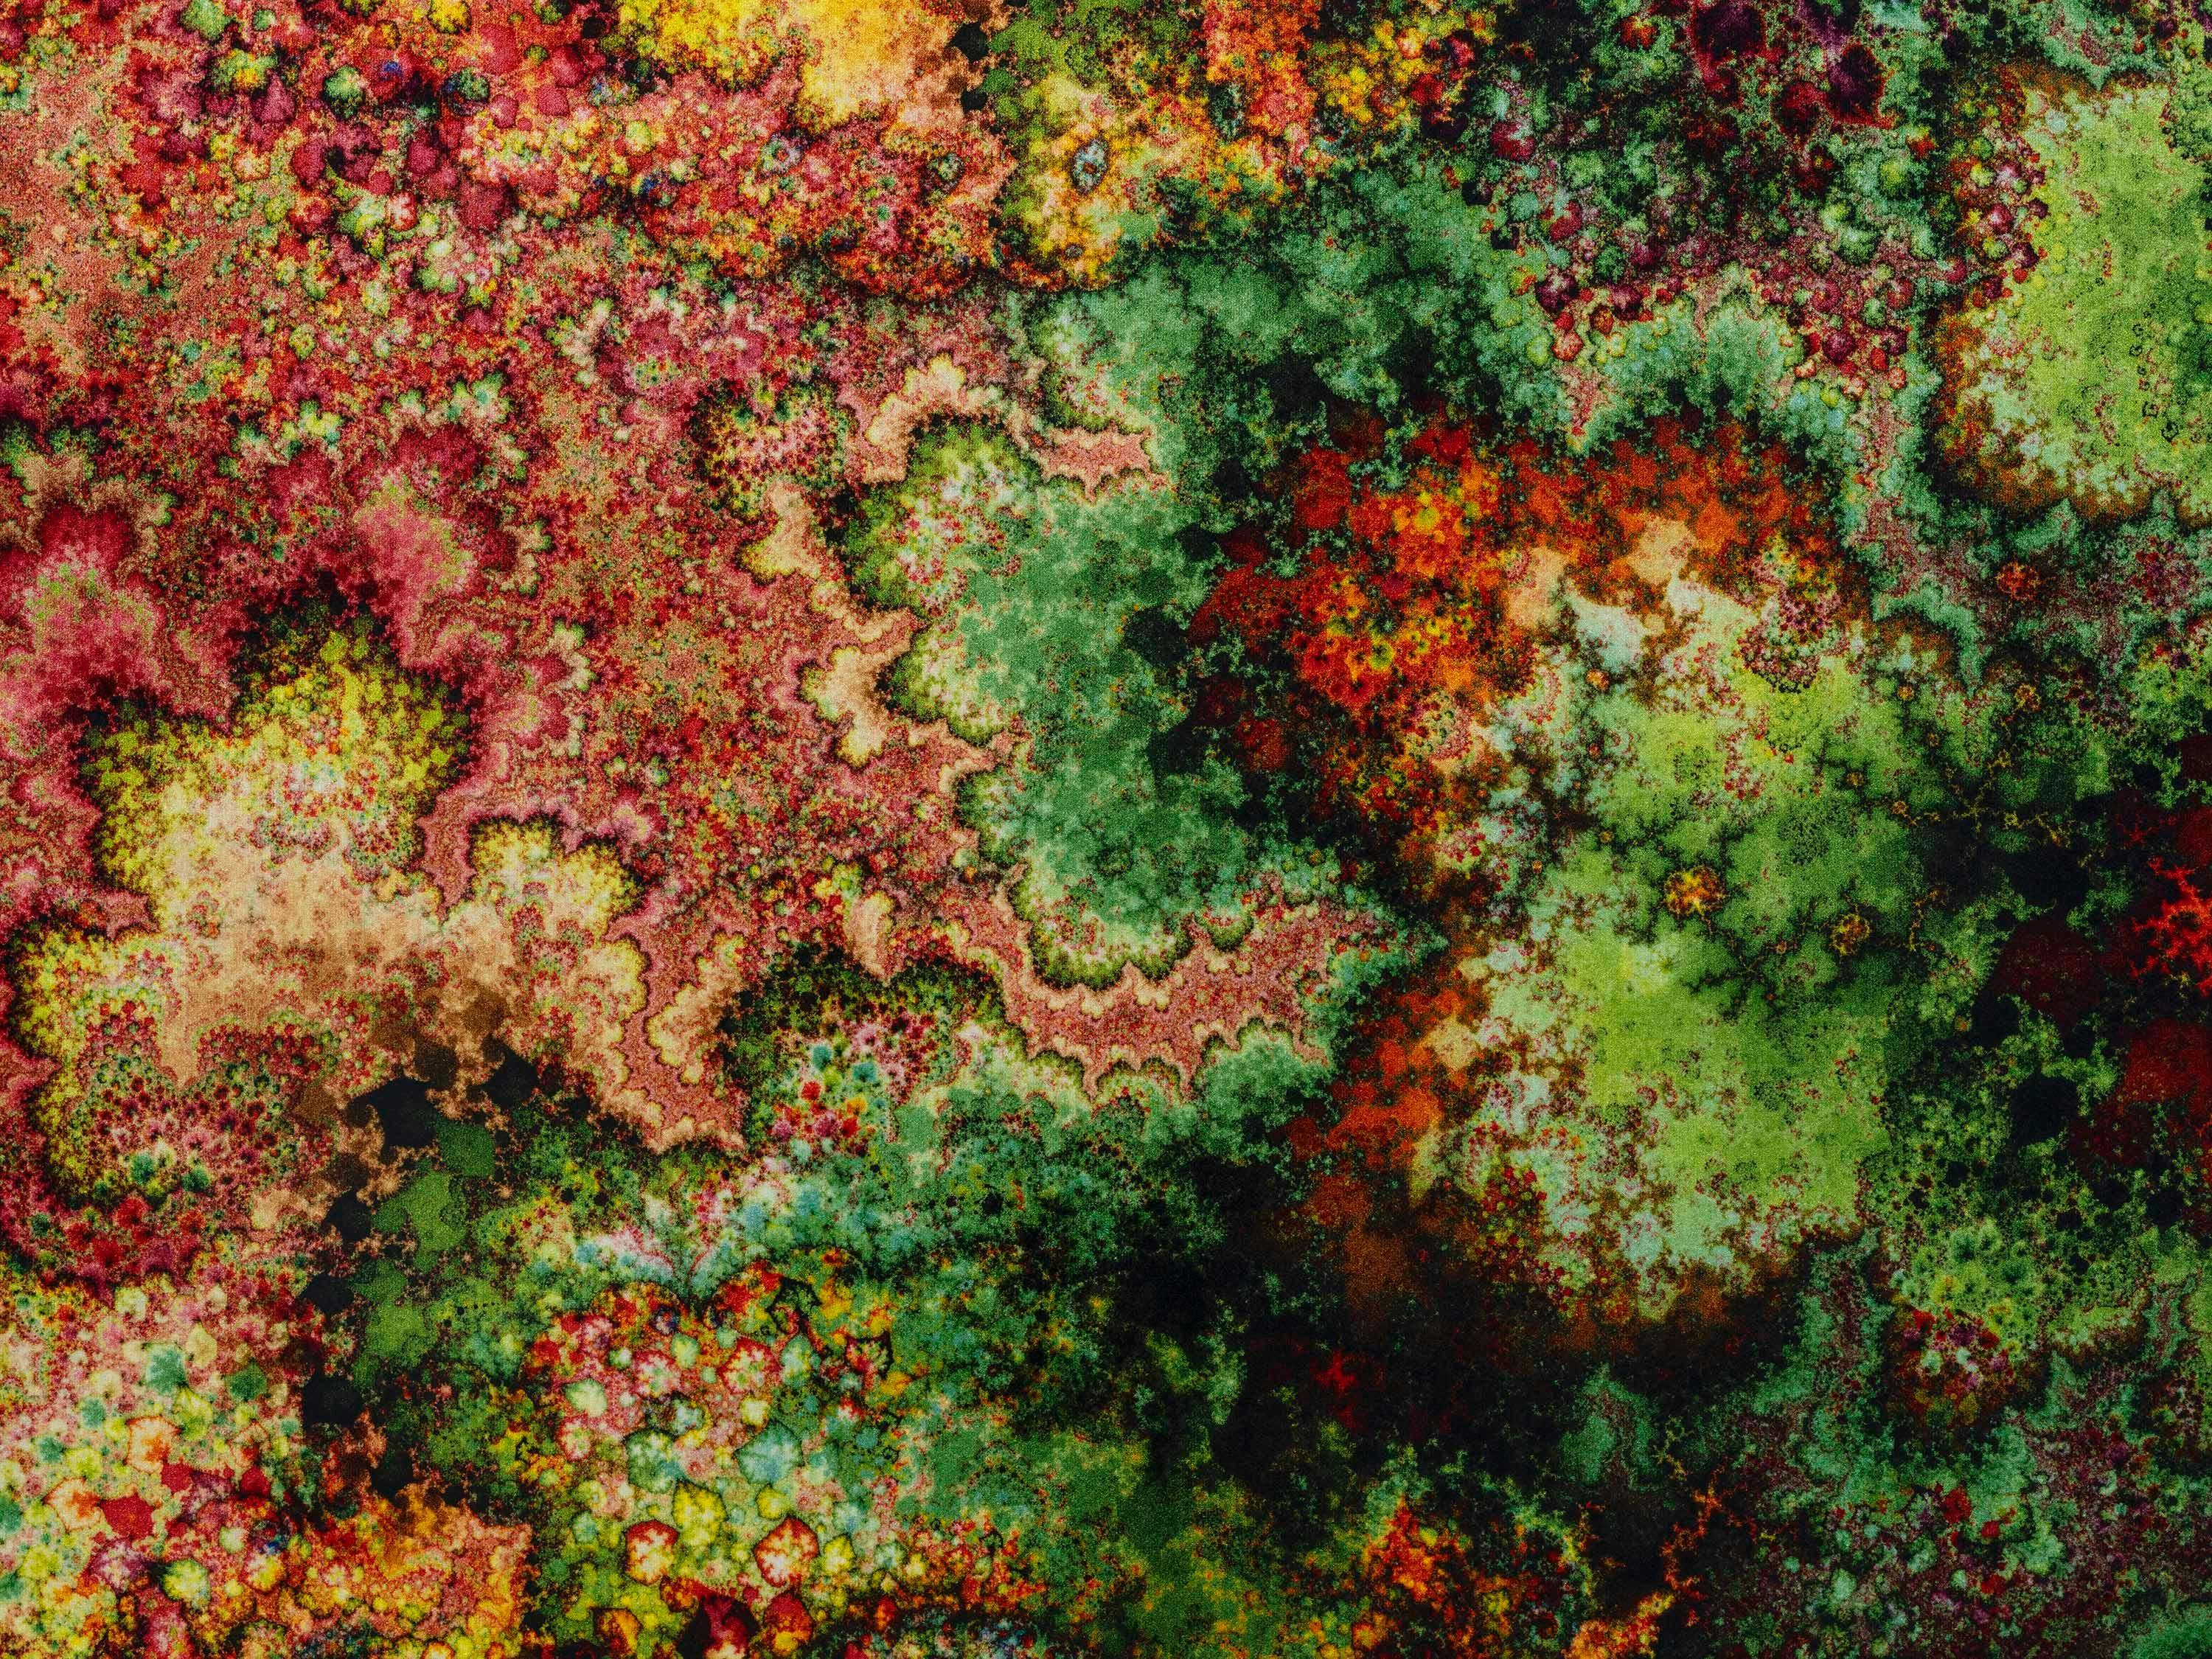 A detail from a Colaris on velour carpet by Thomas Ruff, titled d.o.pe.05 I, dated 2022.